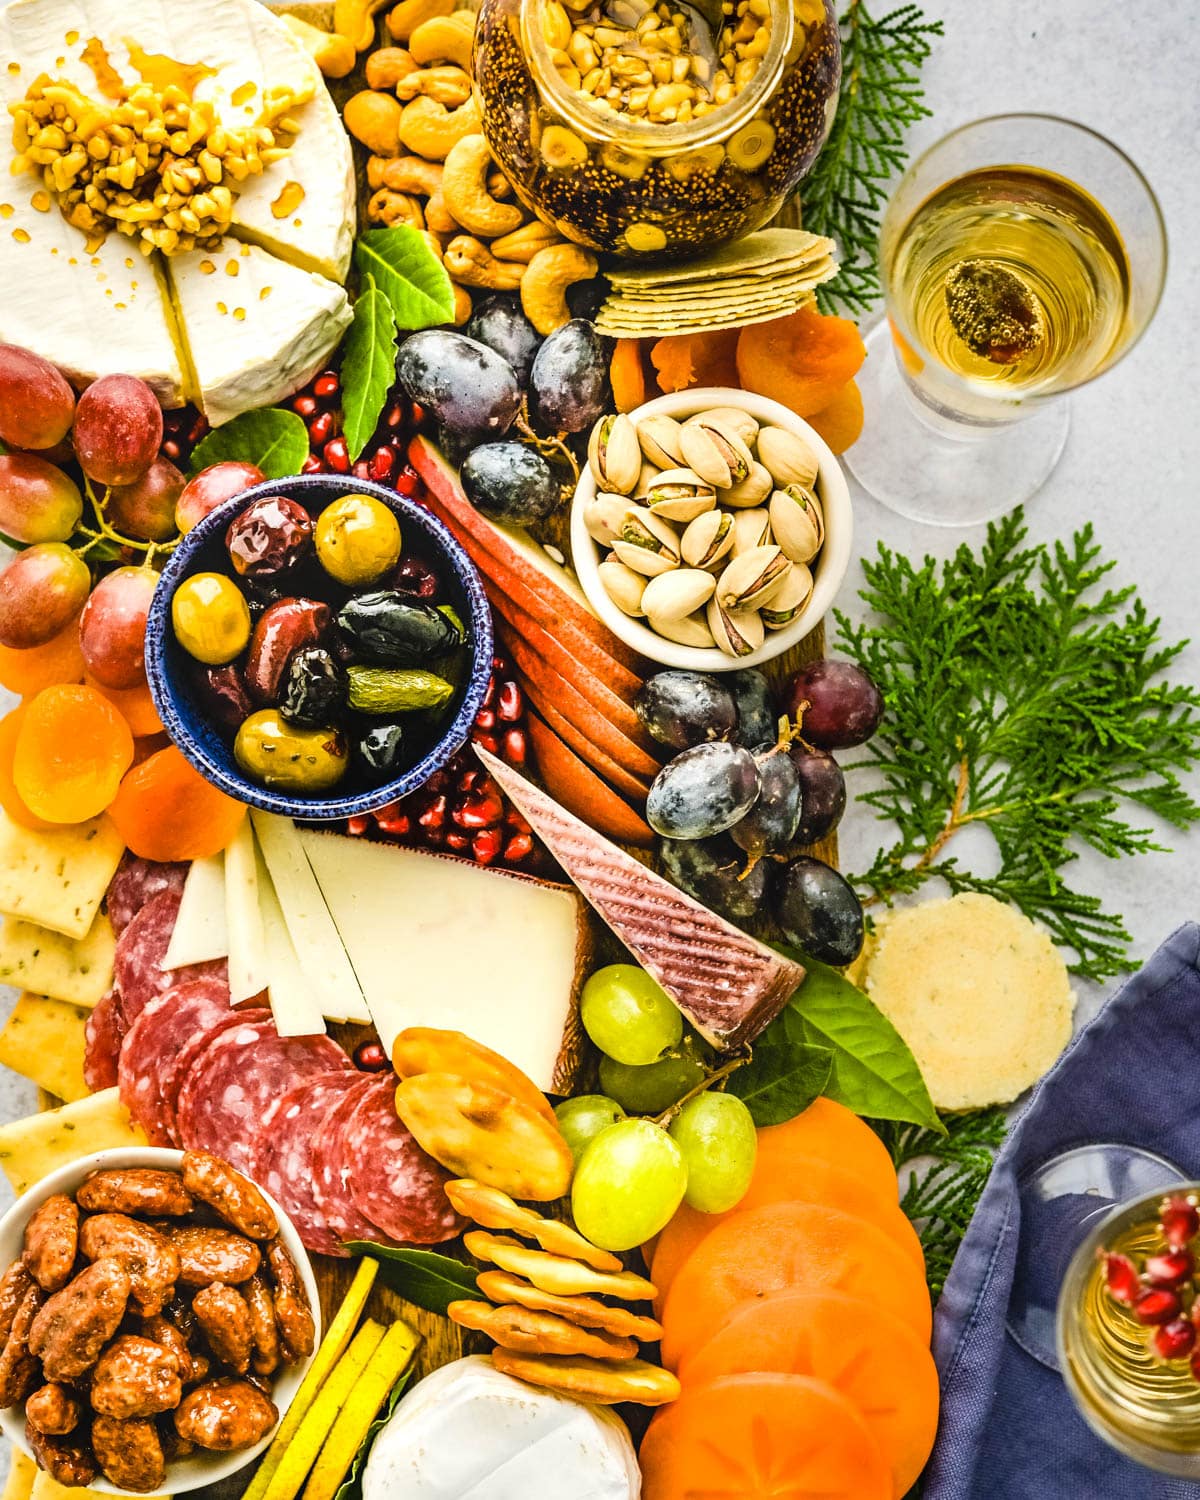 A charcuterie board that's perfect for the holiday season with pistachios, olives, grapes and dried fruits.